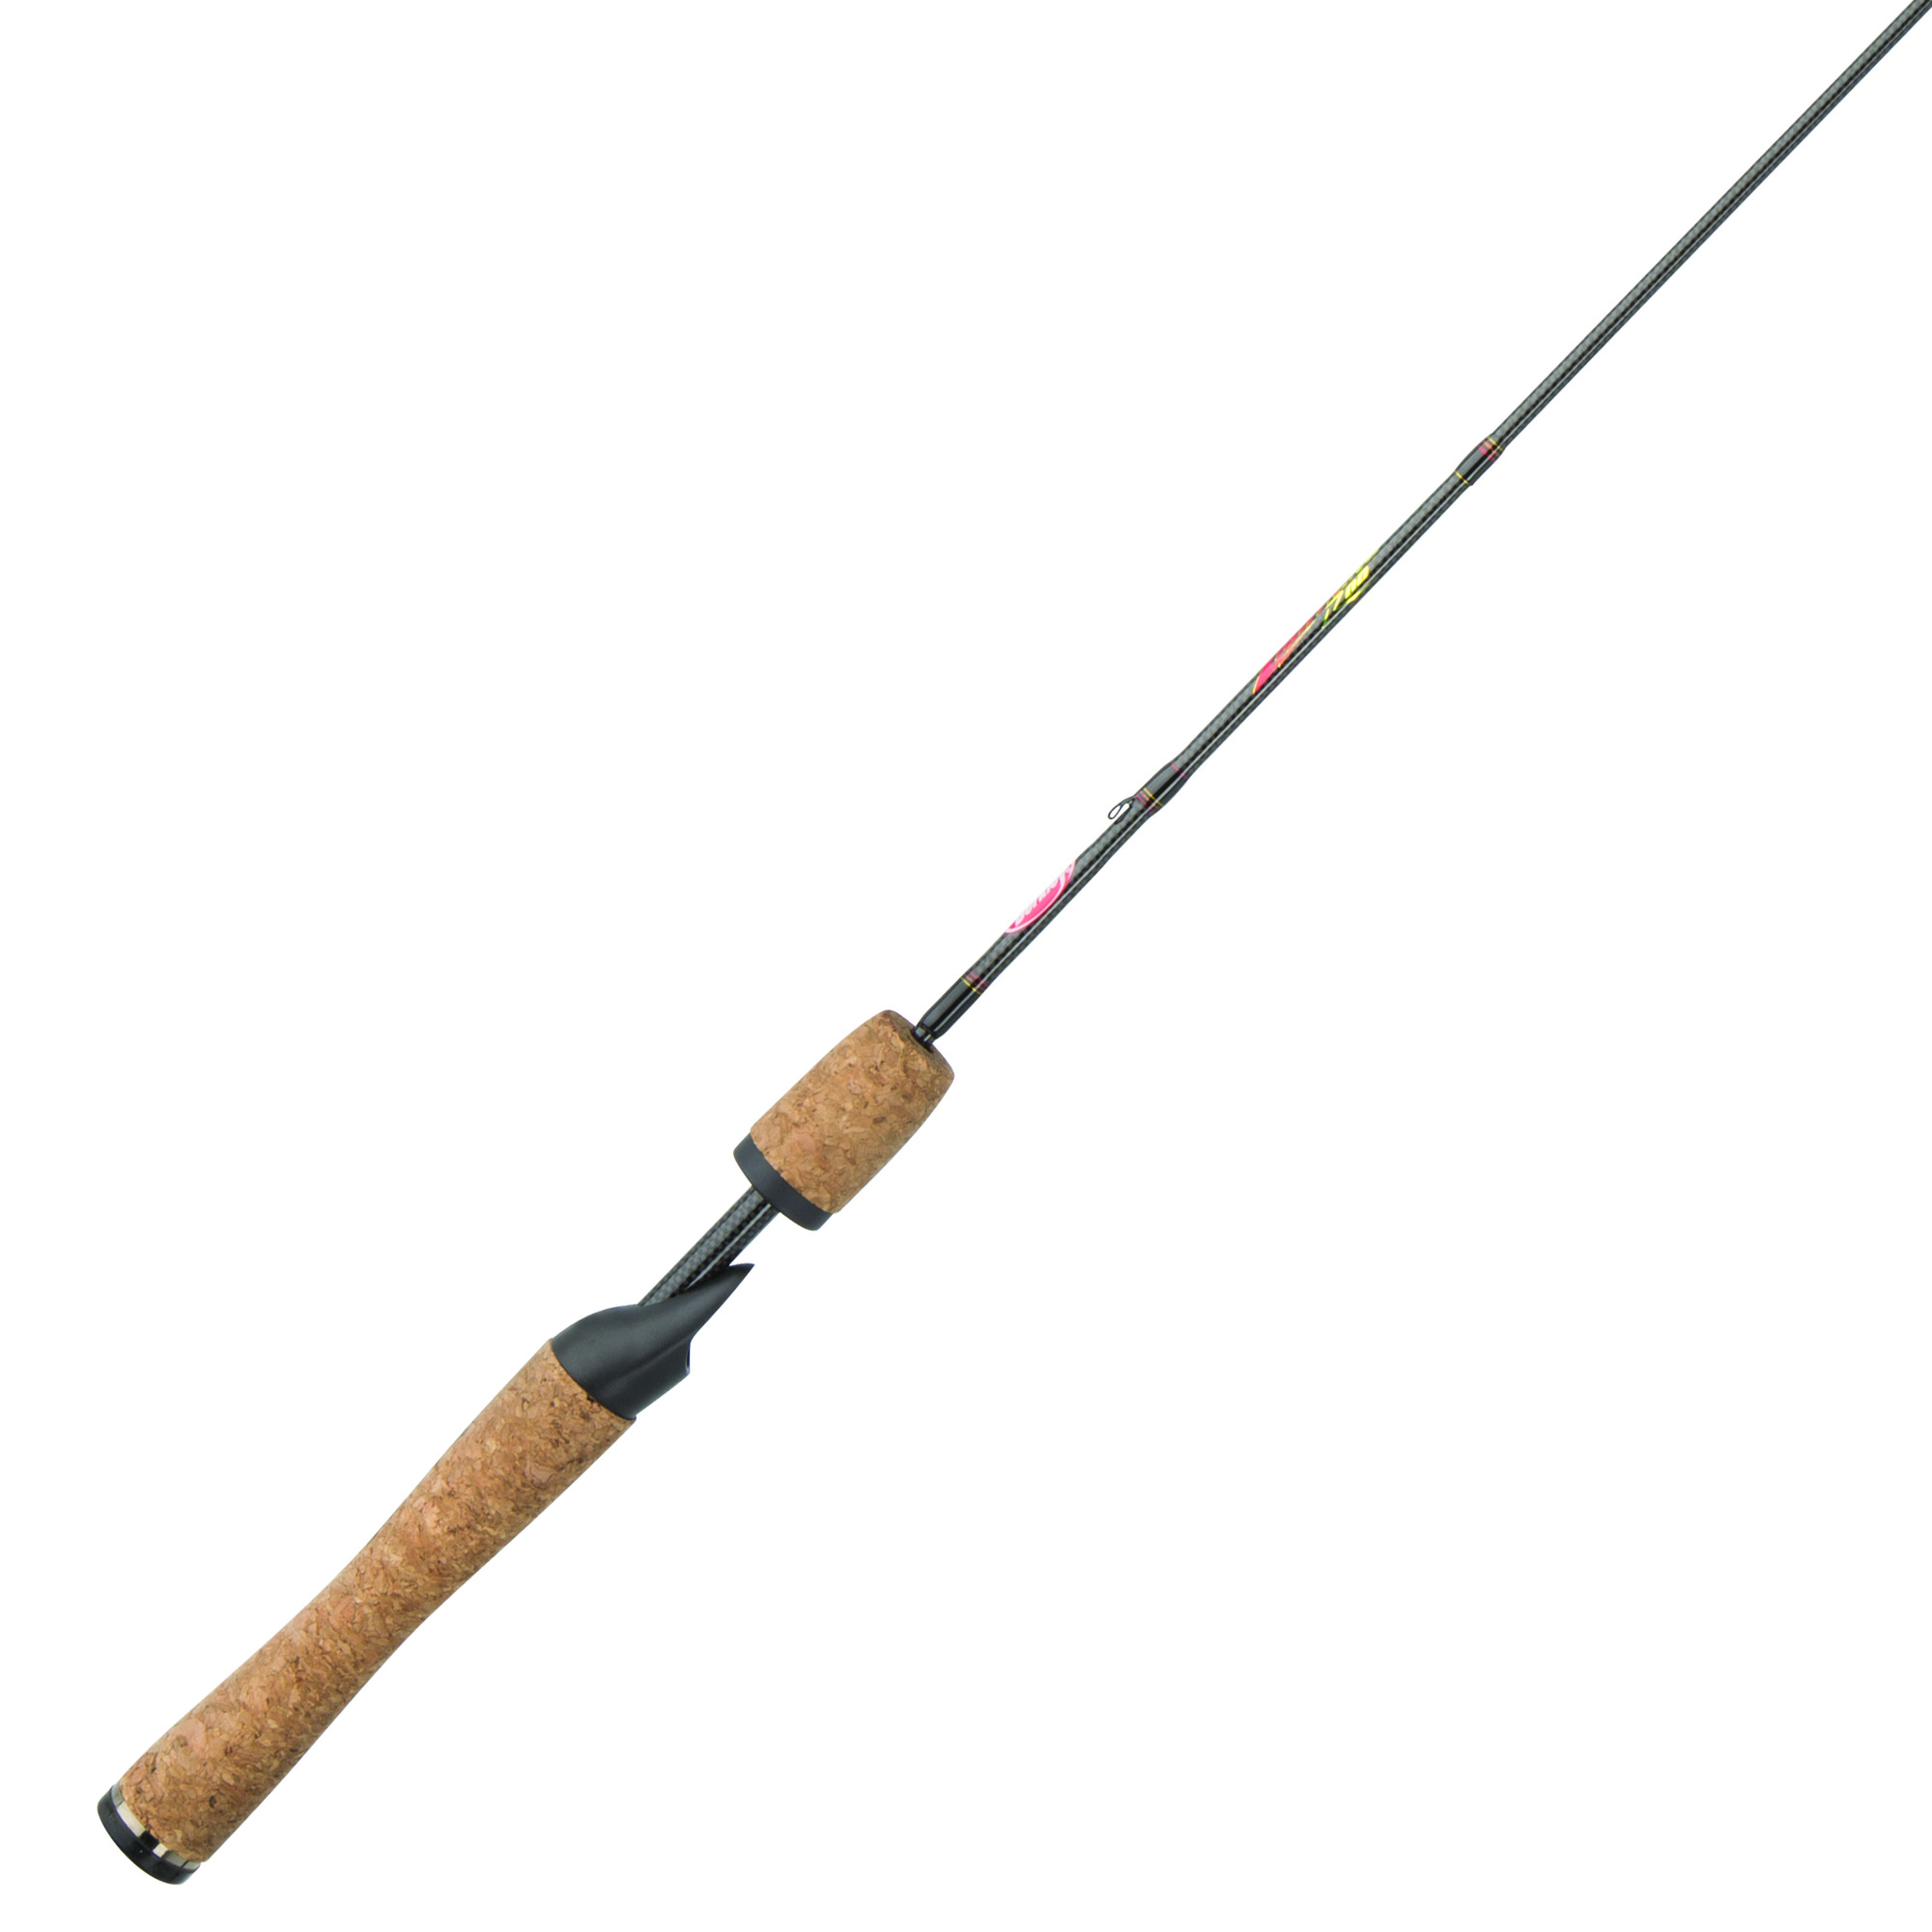 Berkley 4842-2033 Lightning Spinning Rod, Trout 8' 2 Piece, Ultra-Light, 24  Ton Graphite 1/32-1/4oz, 10 Guides, Tack Cork Handle BSLR802UL with Free  S&H — CampSaver